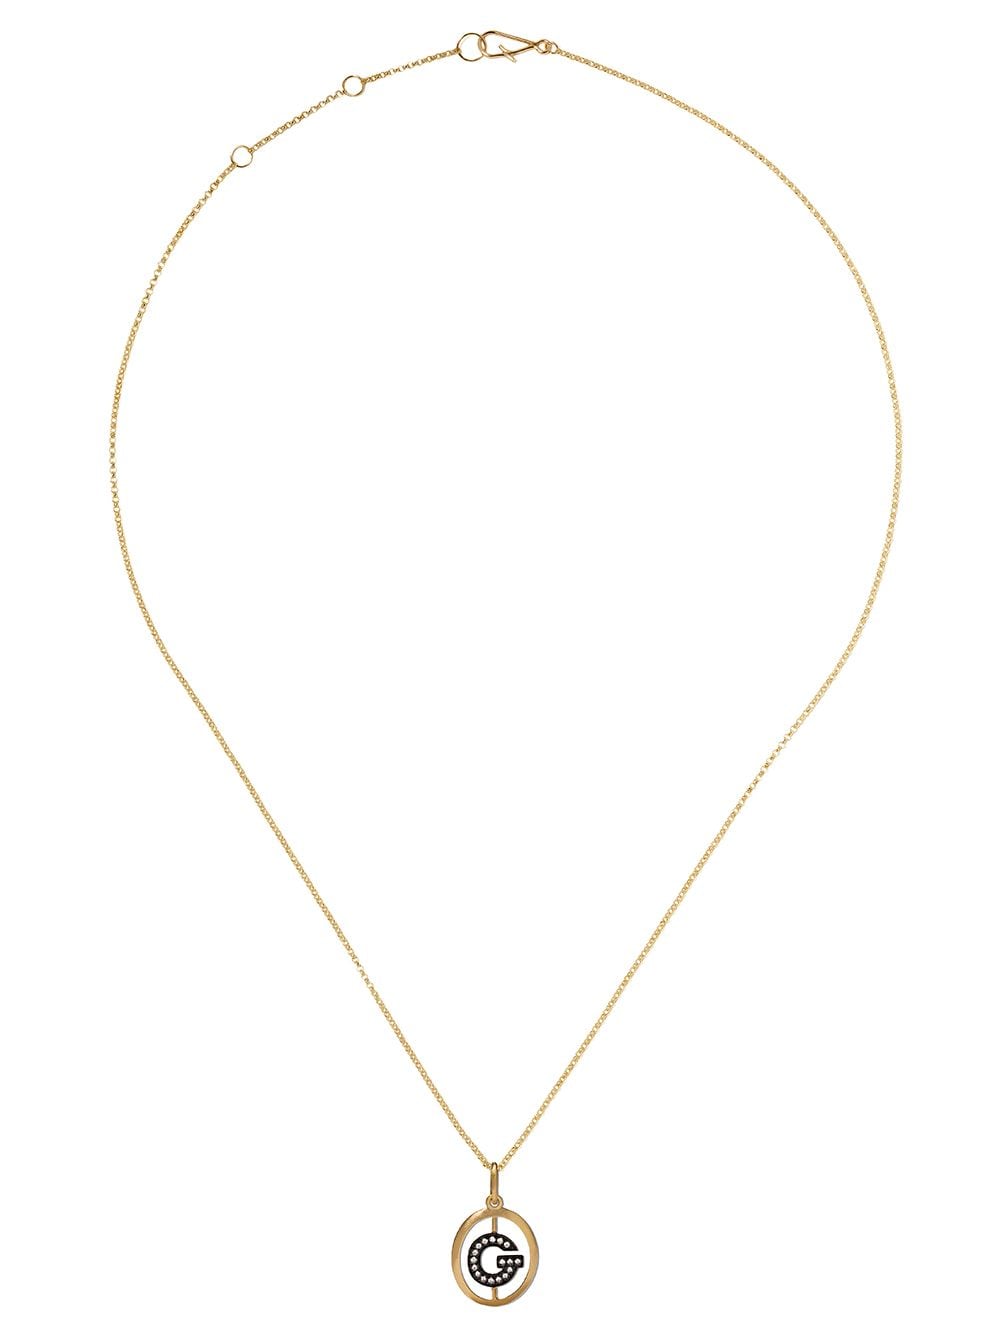 ANNOUSHKA 14KT AND 18KT YELLOW GOLD G DIAMOND INITIAL PENDANT NECKLACE